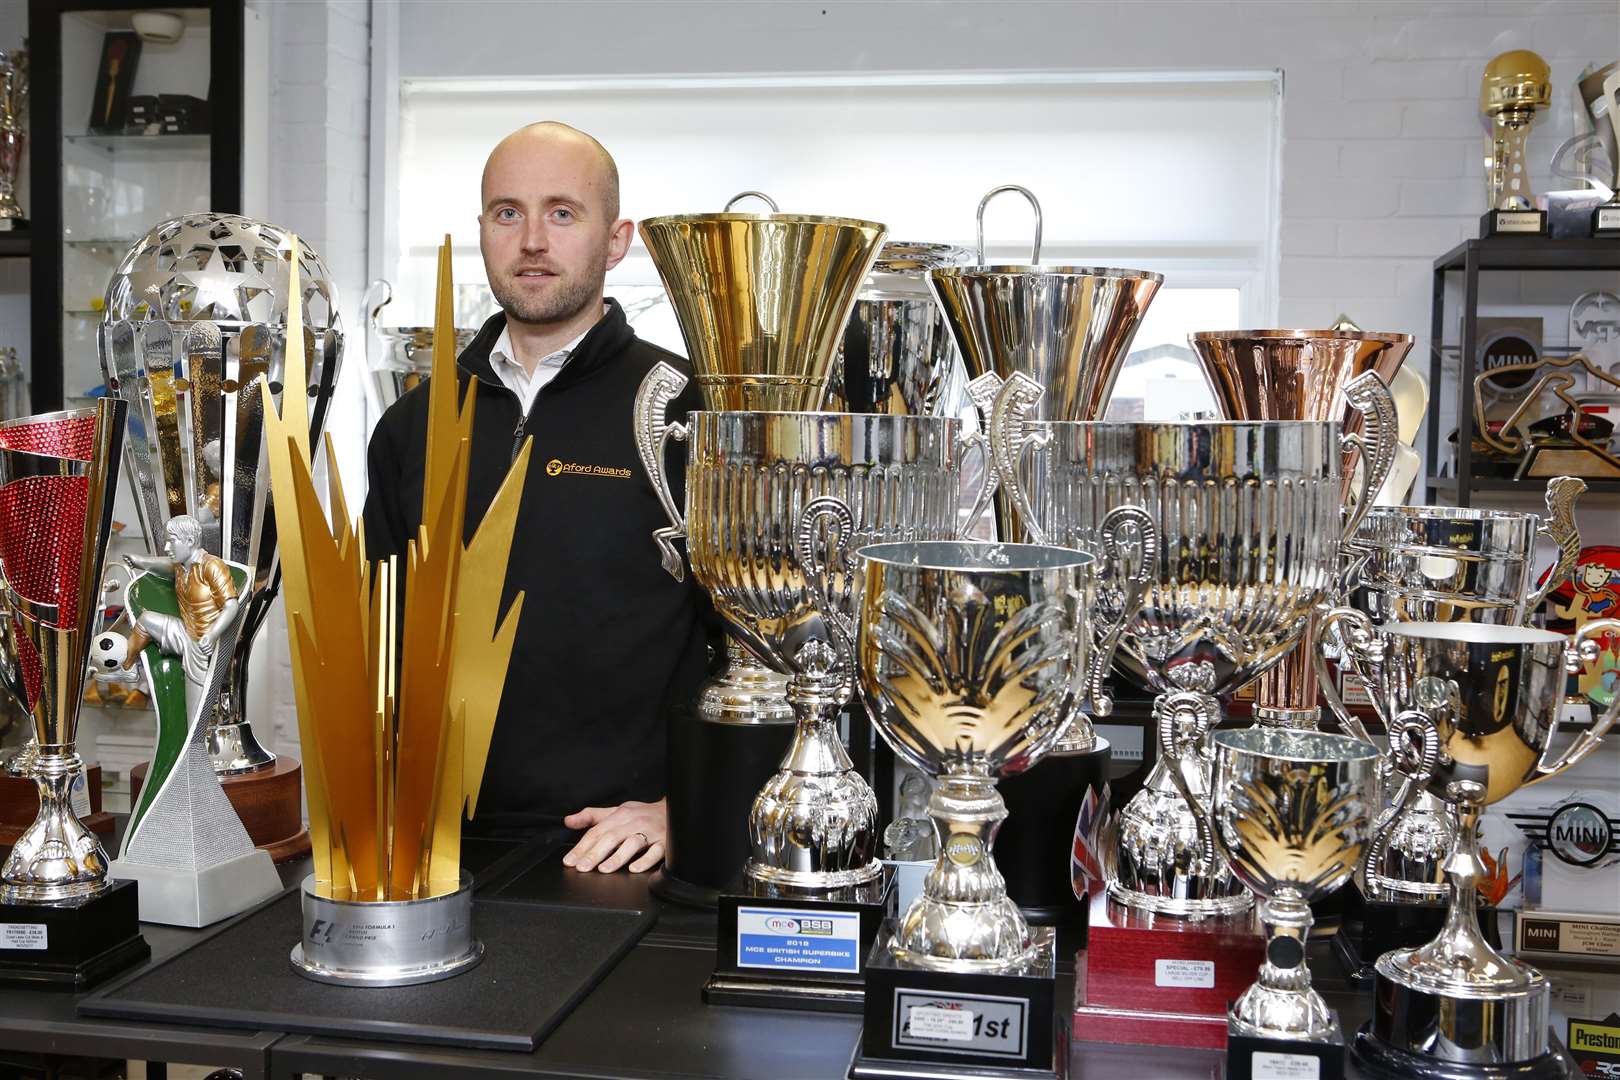 British Formula 1 Grand Prix trophies created by Bearsted firm